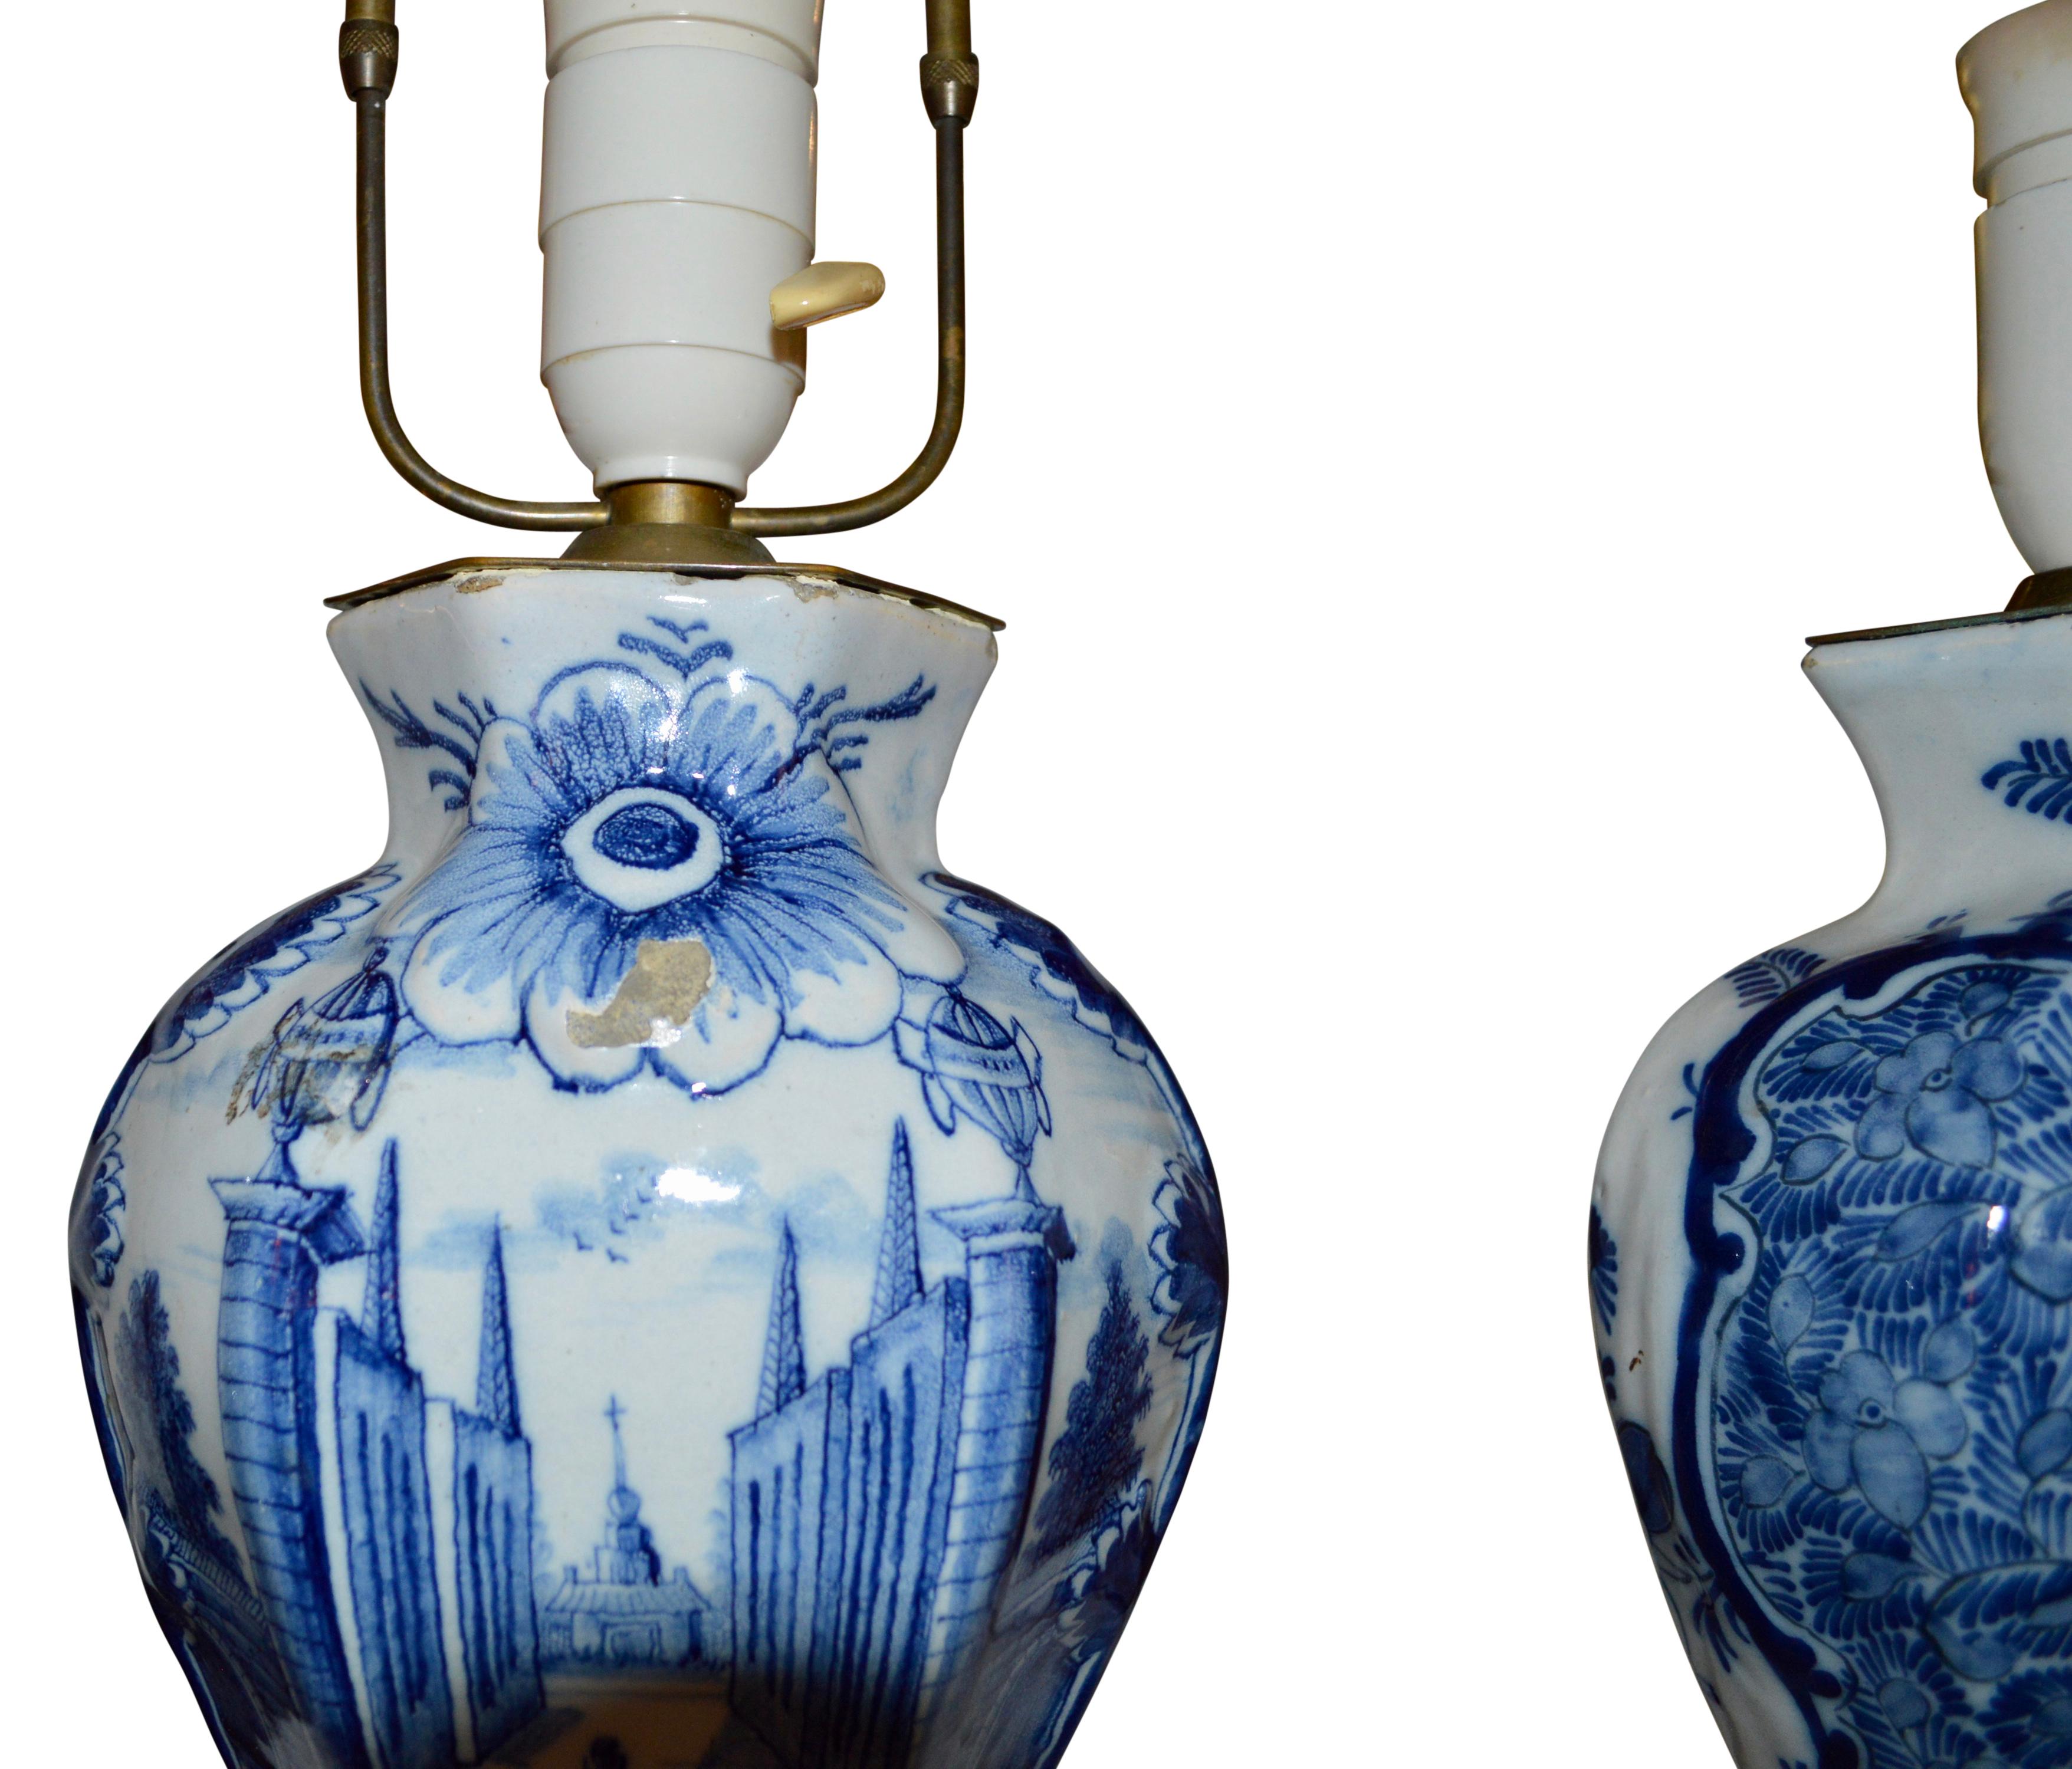 Pair Of 18th Century Blue And White Delft Table Lamps (Rokoko)